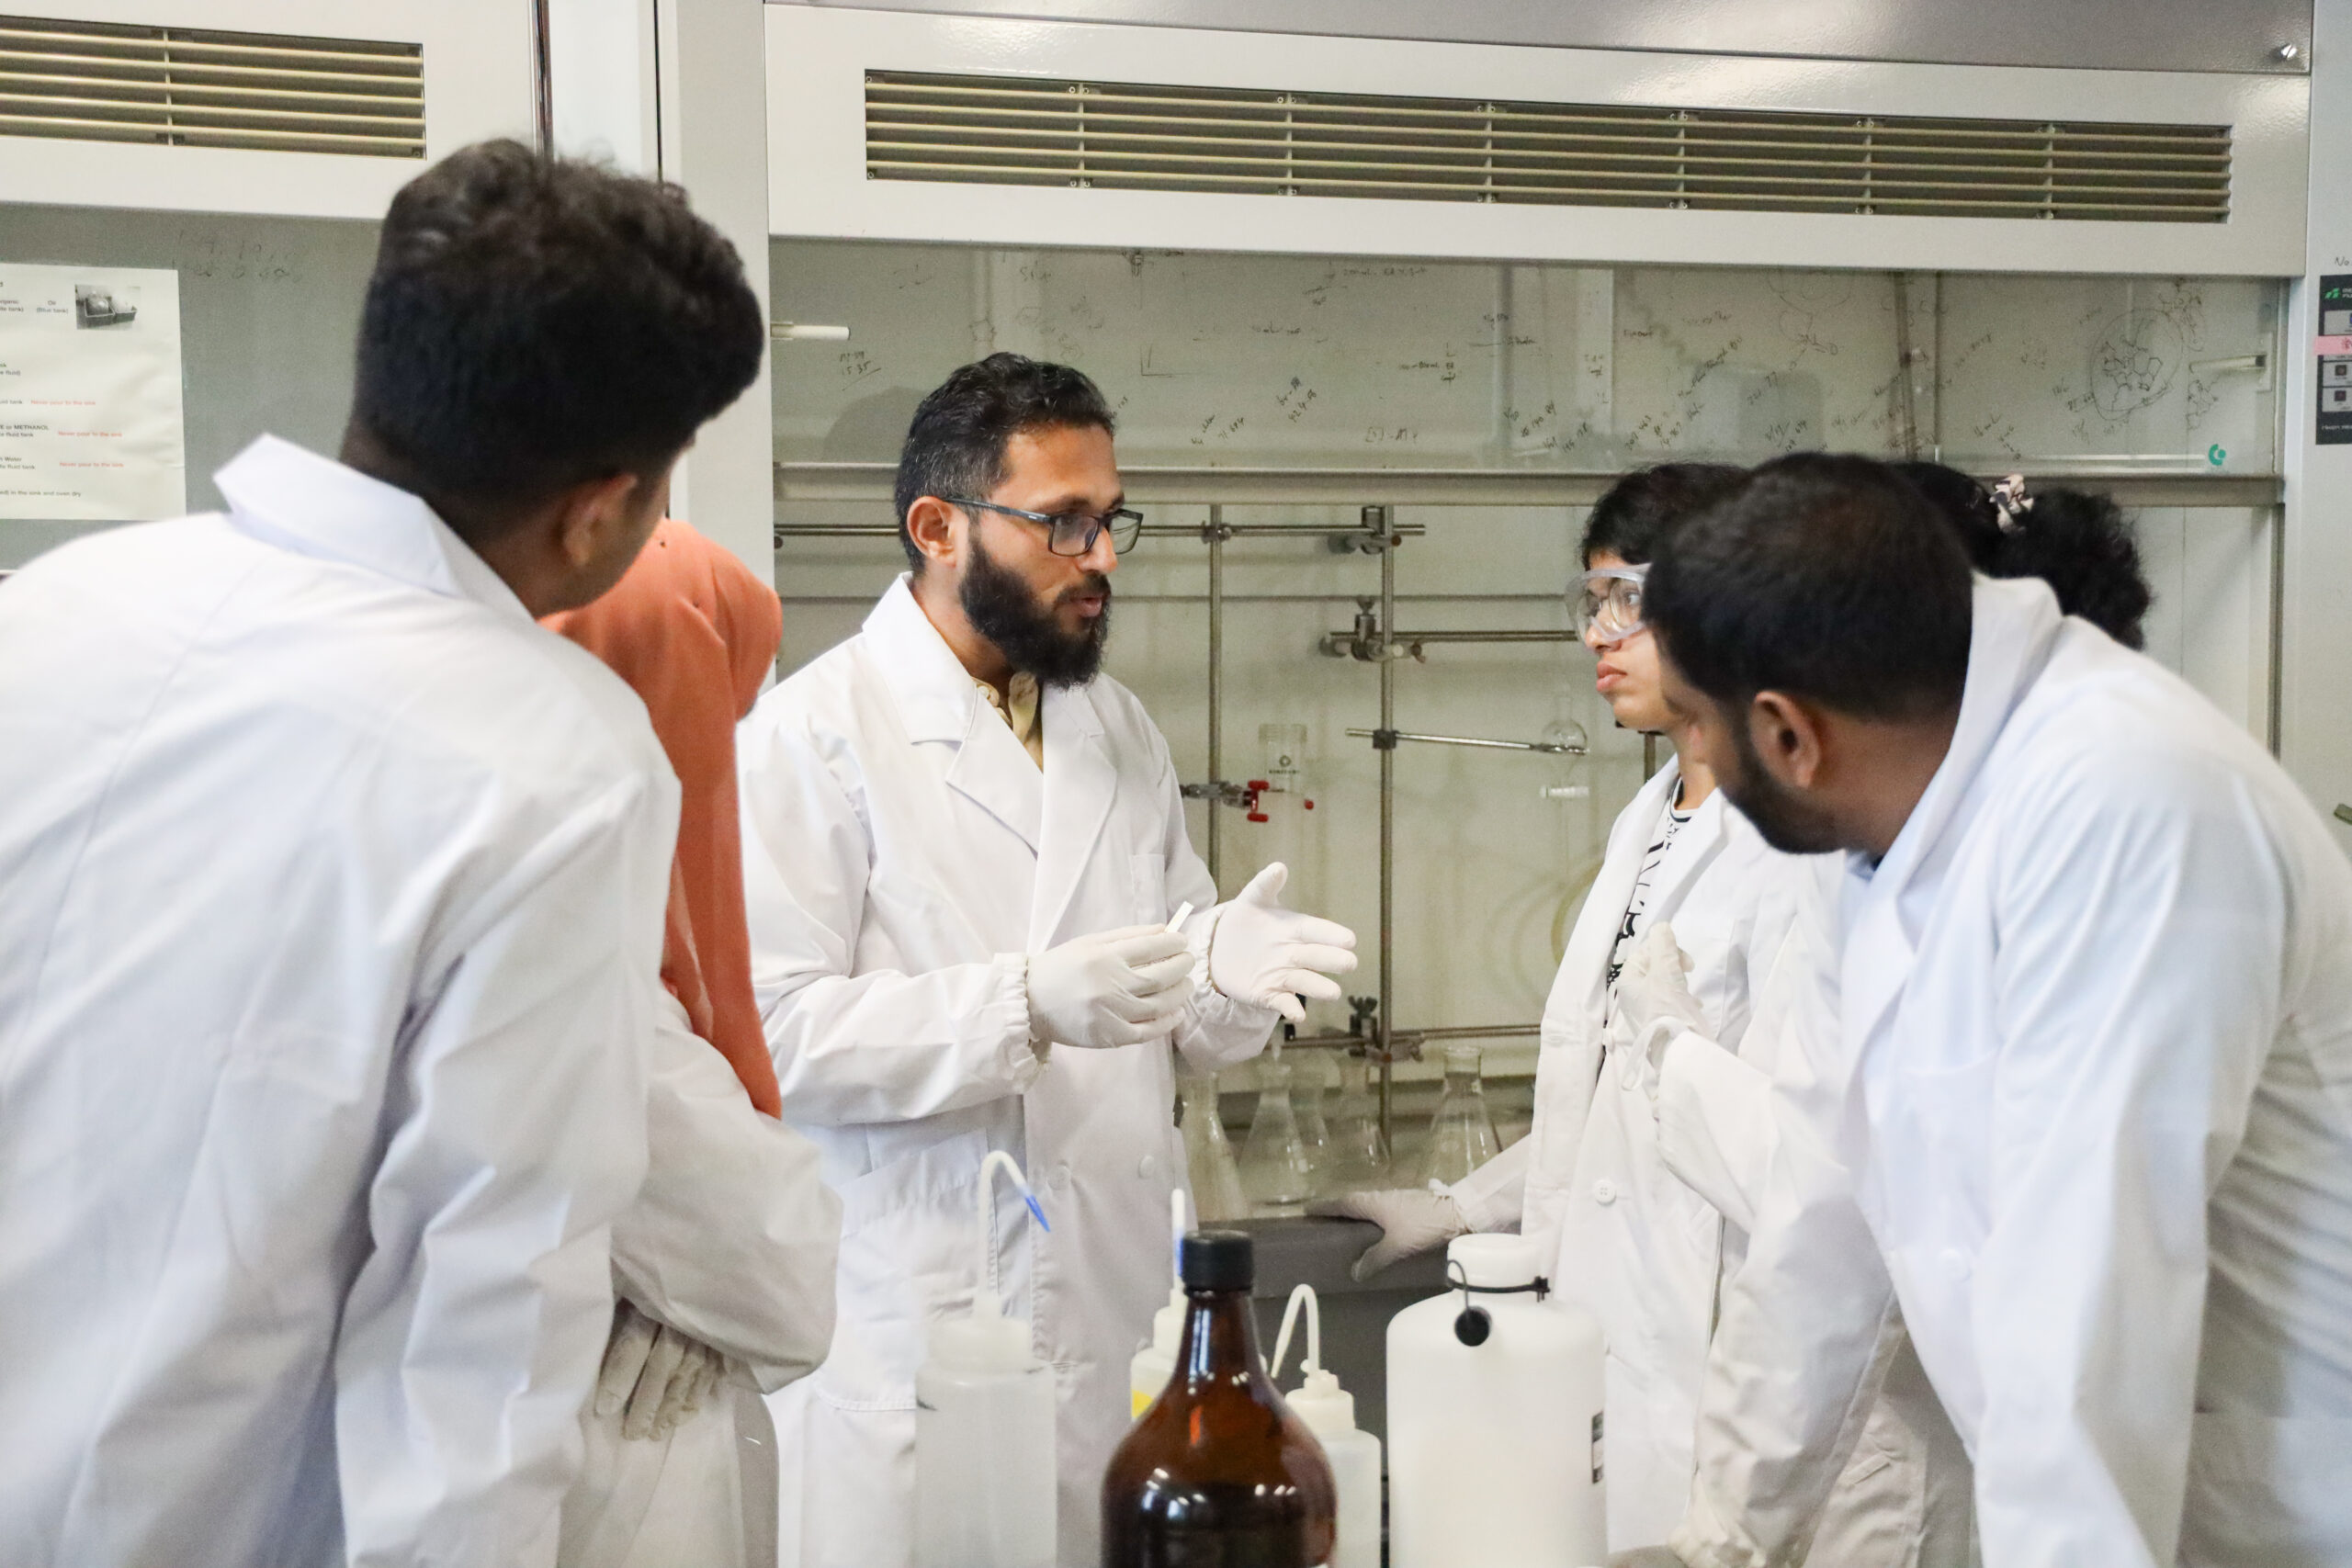 Dr. Hashim and 5 students in lab coats are in the middle of a discussion in a laboratory.